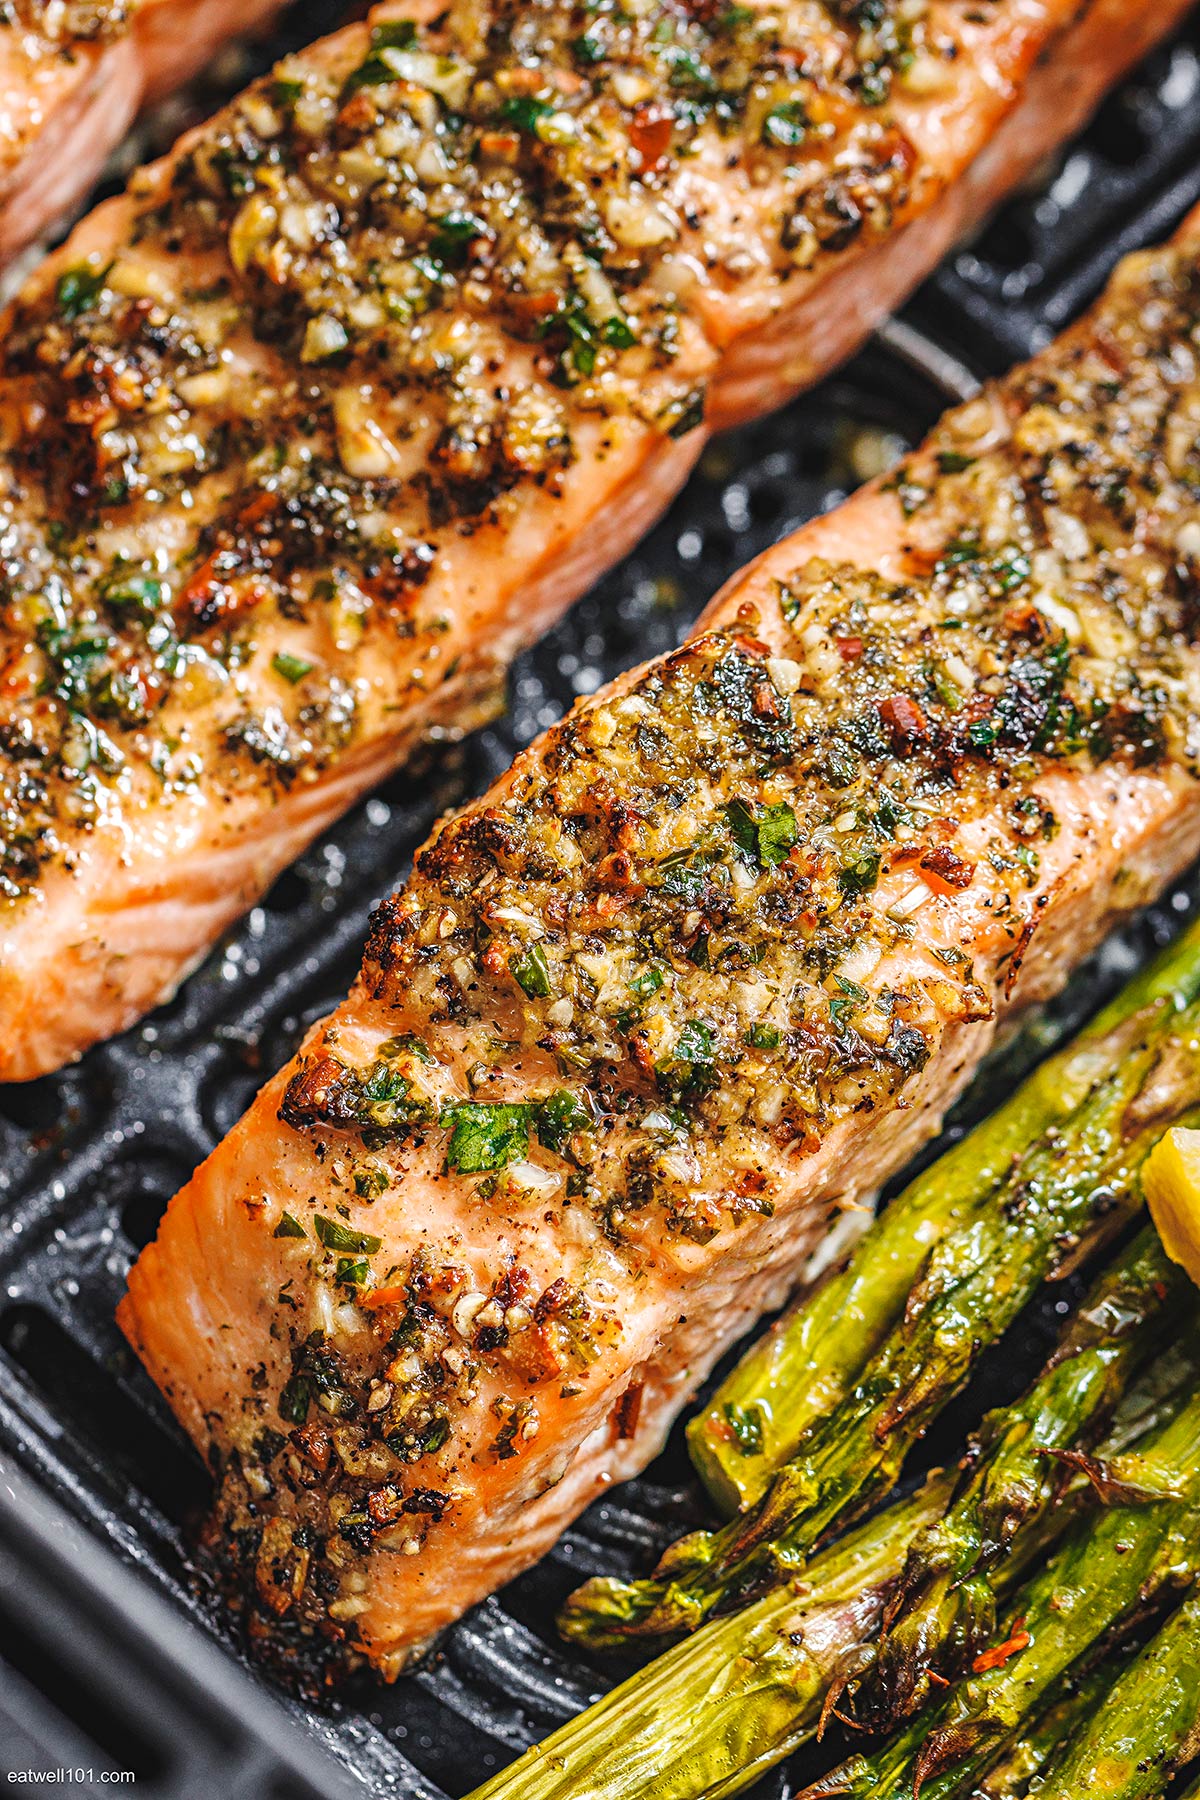 https://www.eatwell101.com/wp-content/uploads/2023/03/salmon-cooked-in-the-air-fryer.jpg